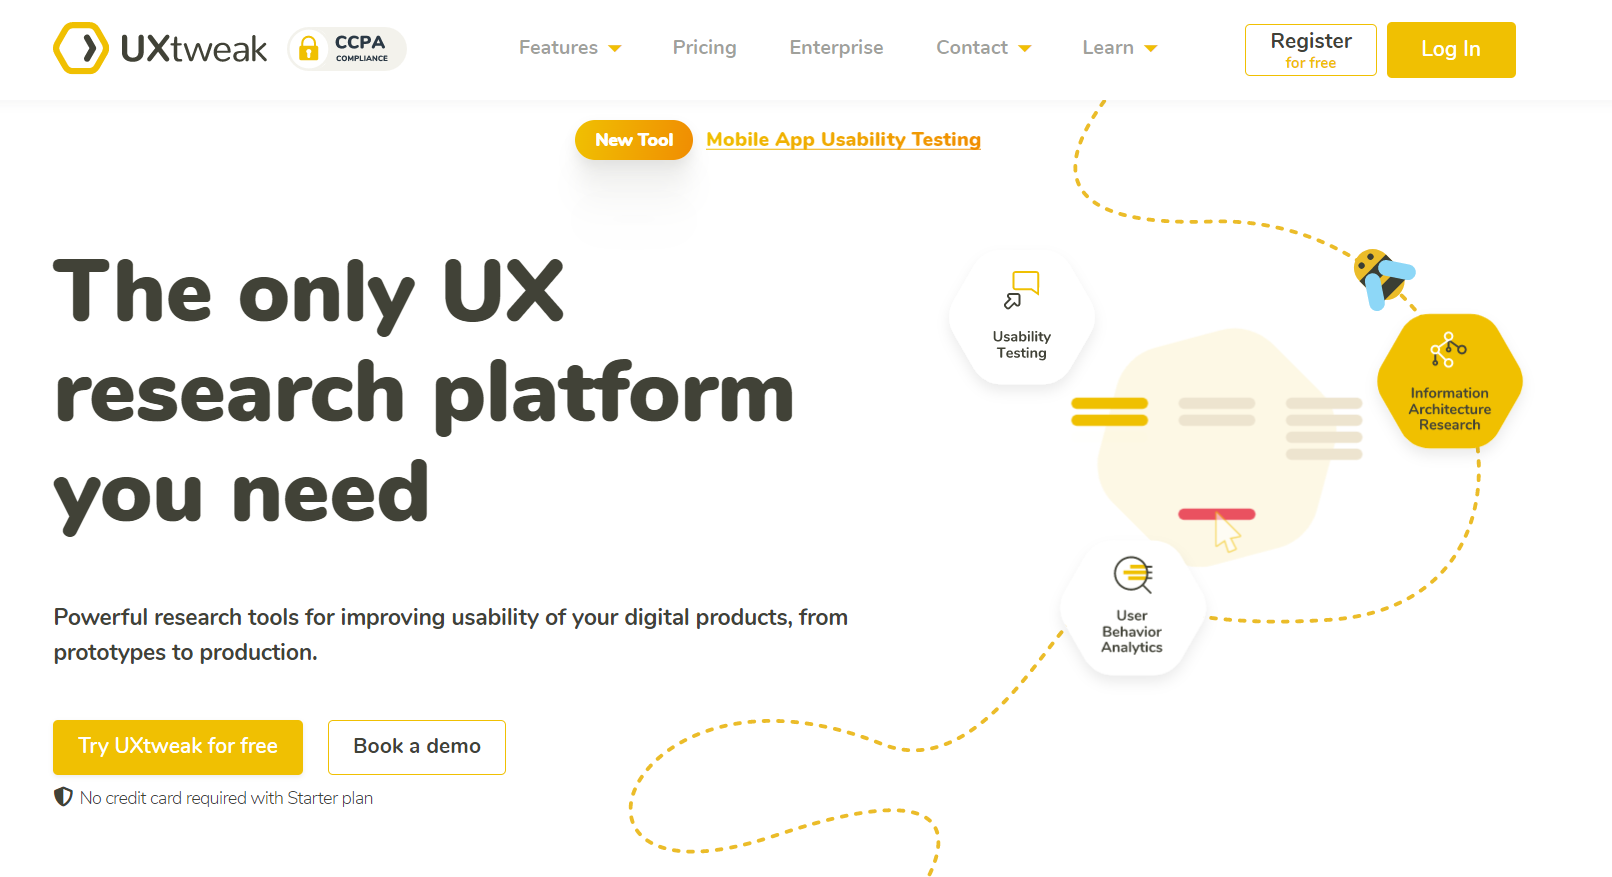 user journey map tools